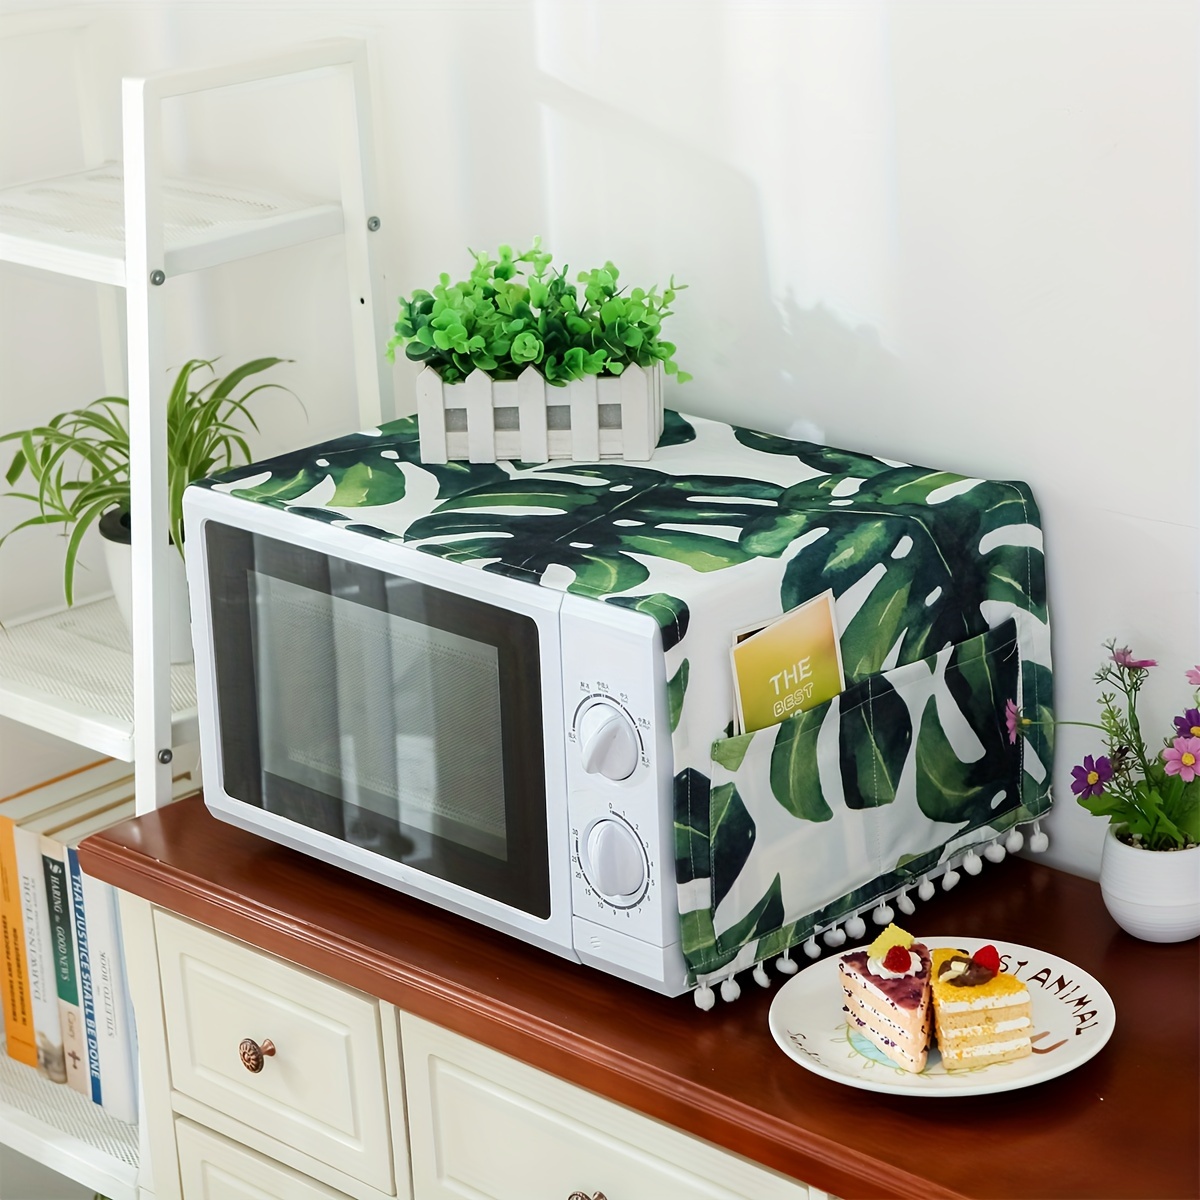 Electric Oven Cover Cloth Microwave Oven Cotton And Linen Fabric